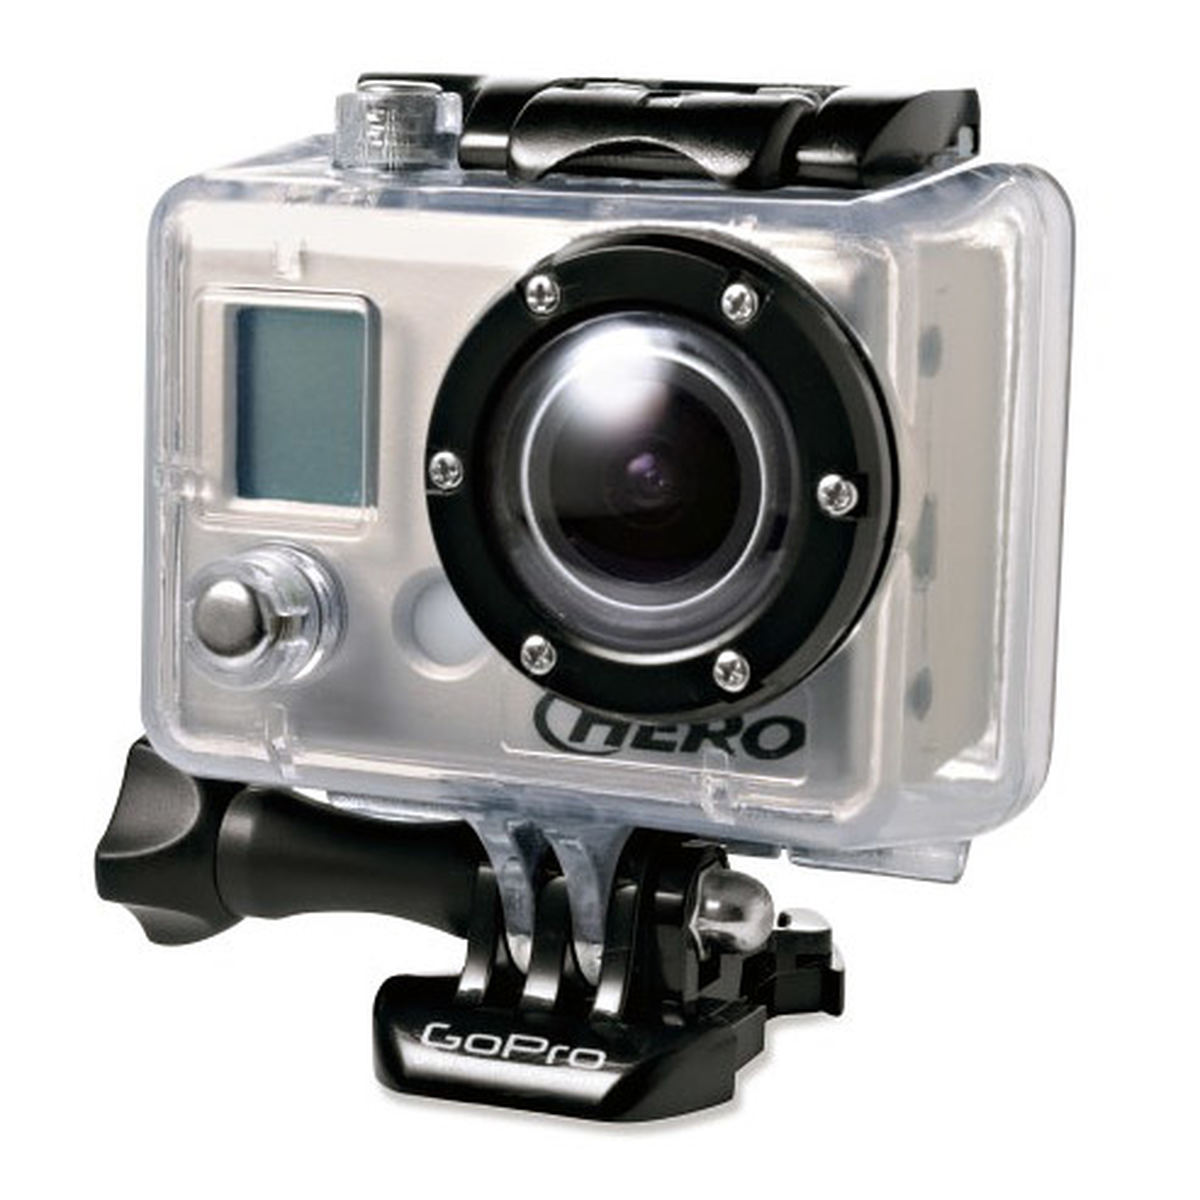 GoPro HD Hero 1 : Specifications and Opinions | JuzaPhoto